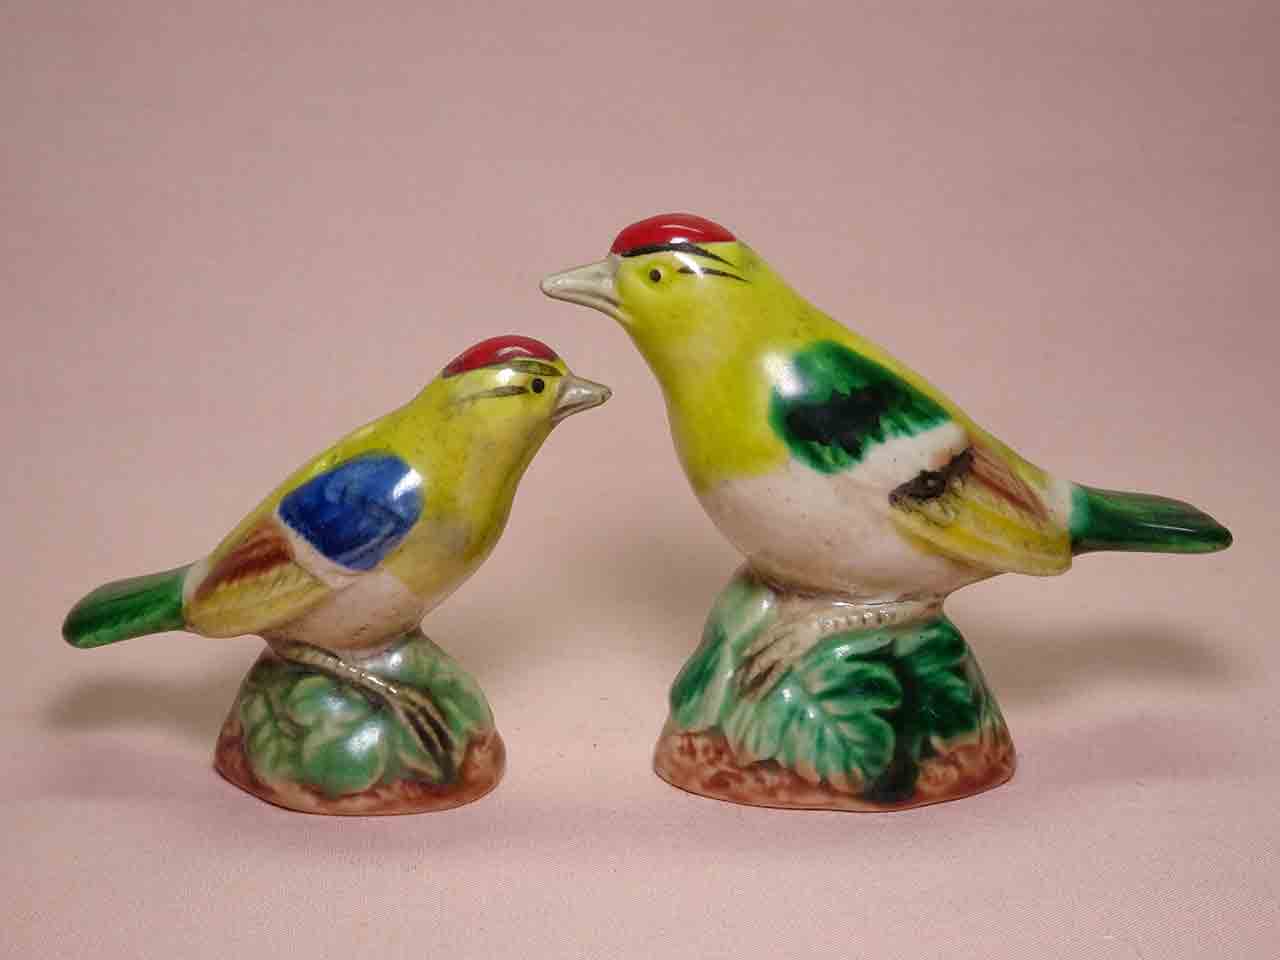 Vintage Made in Japan birds salt and pepper shakers - Goldfinches